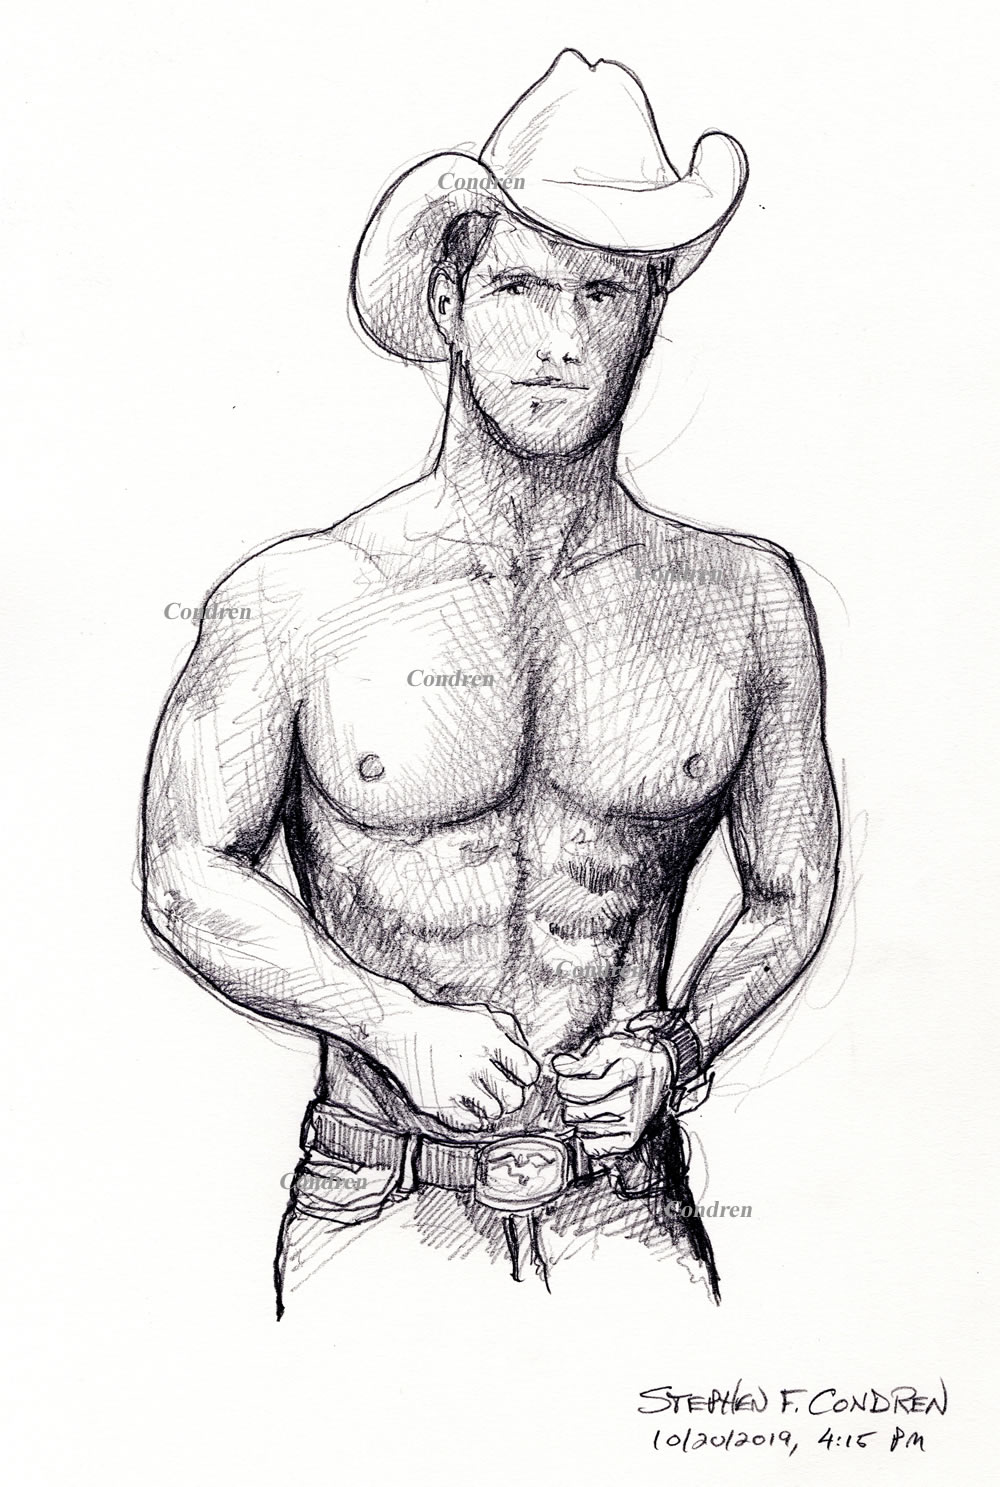 Gay cowboy drawing #477Z, in pencil, by artist Stephen F. Condren, with prints and scans.